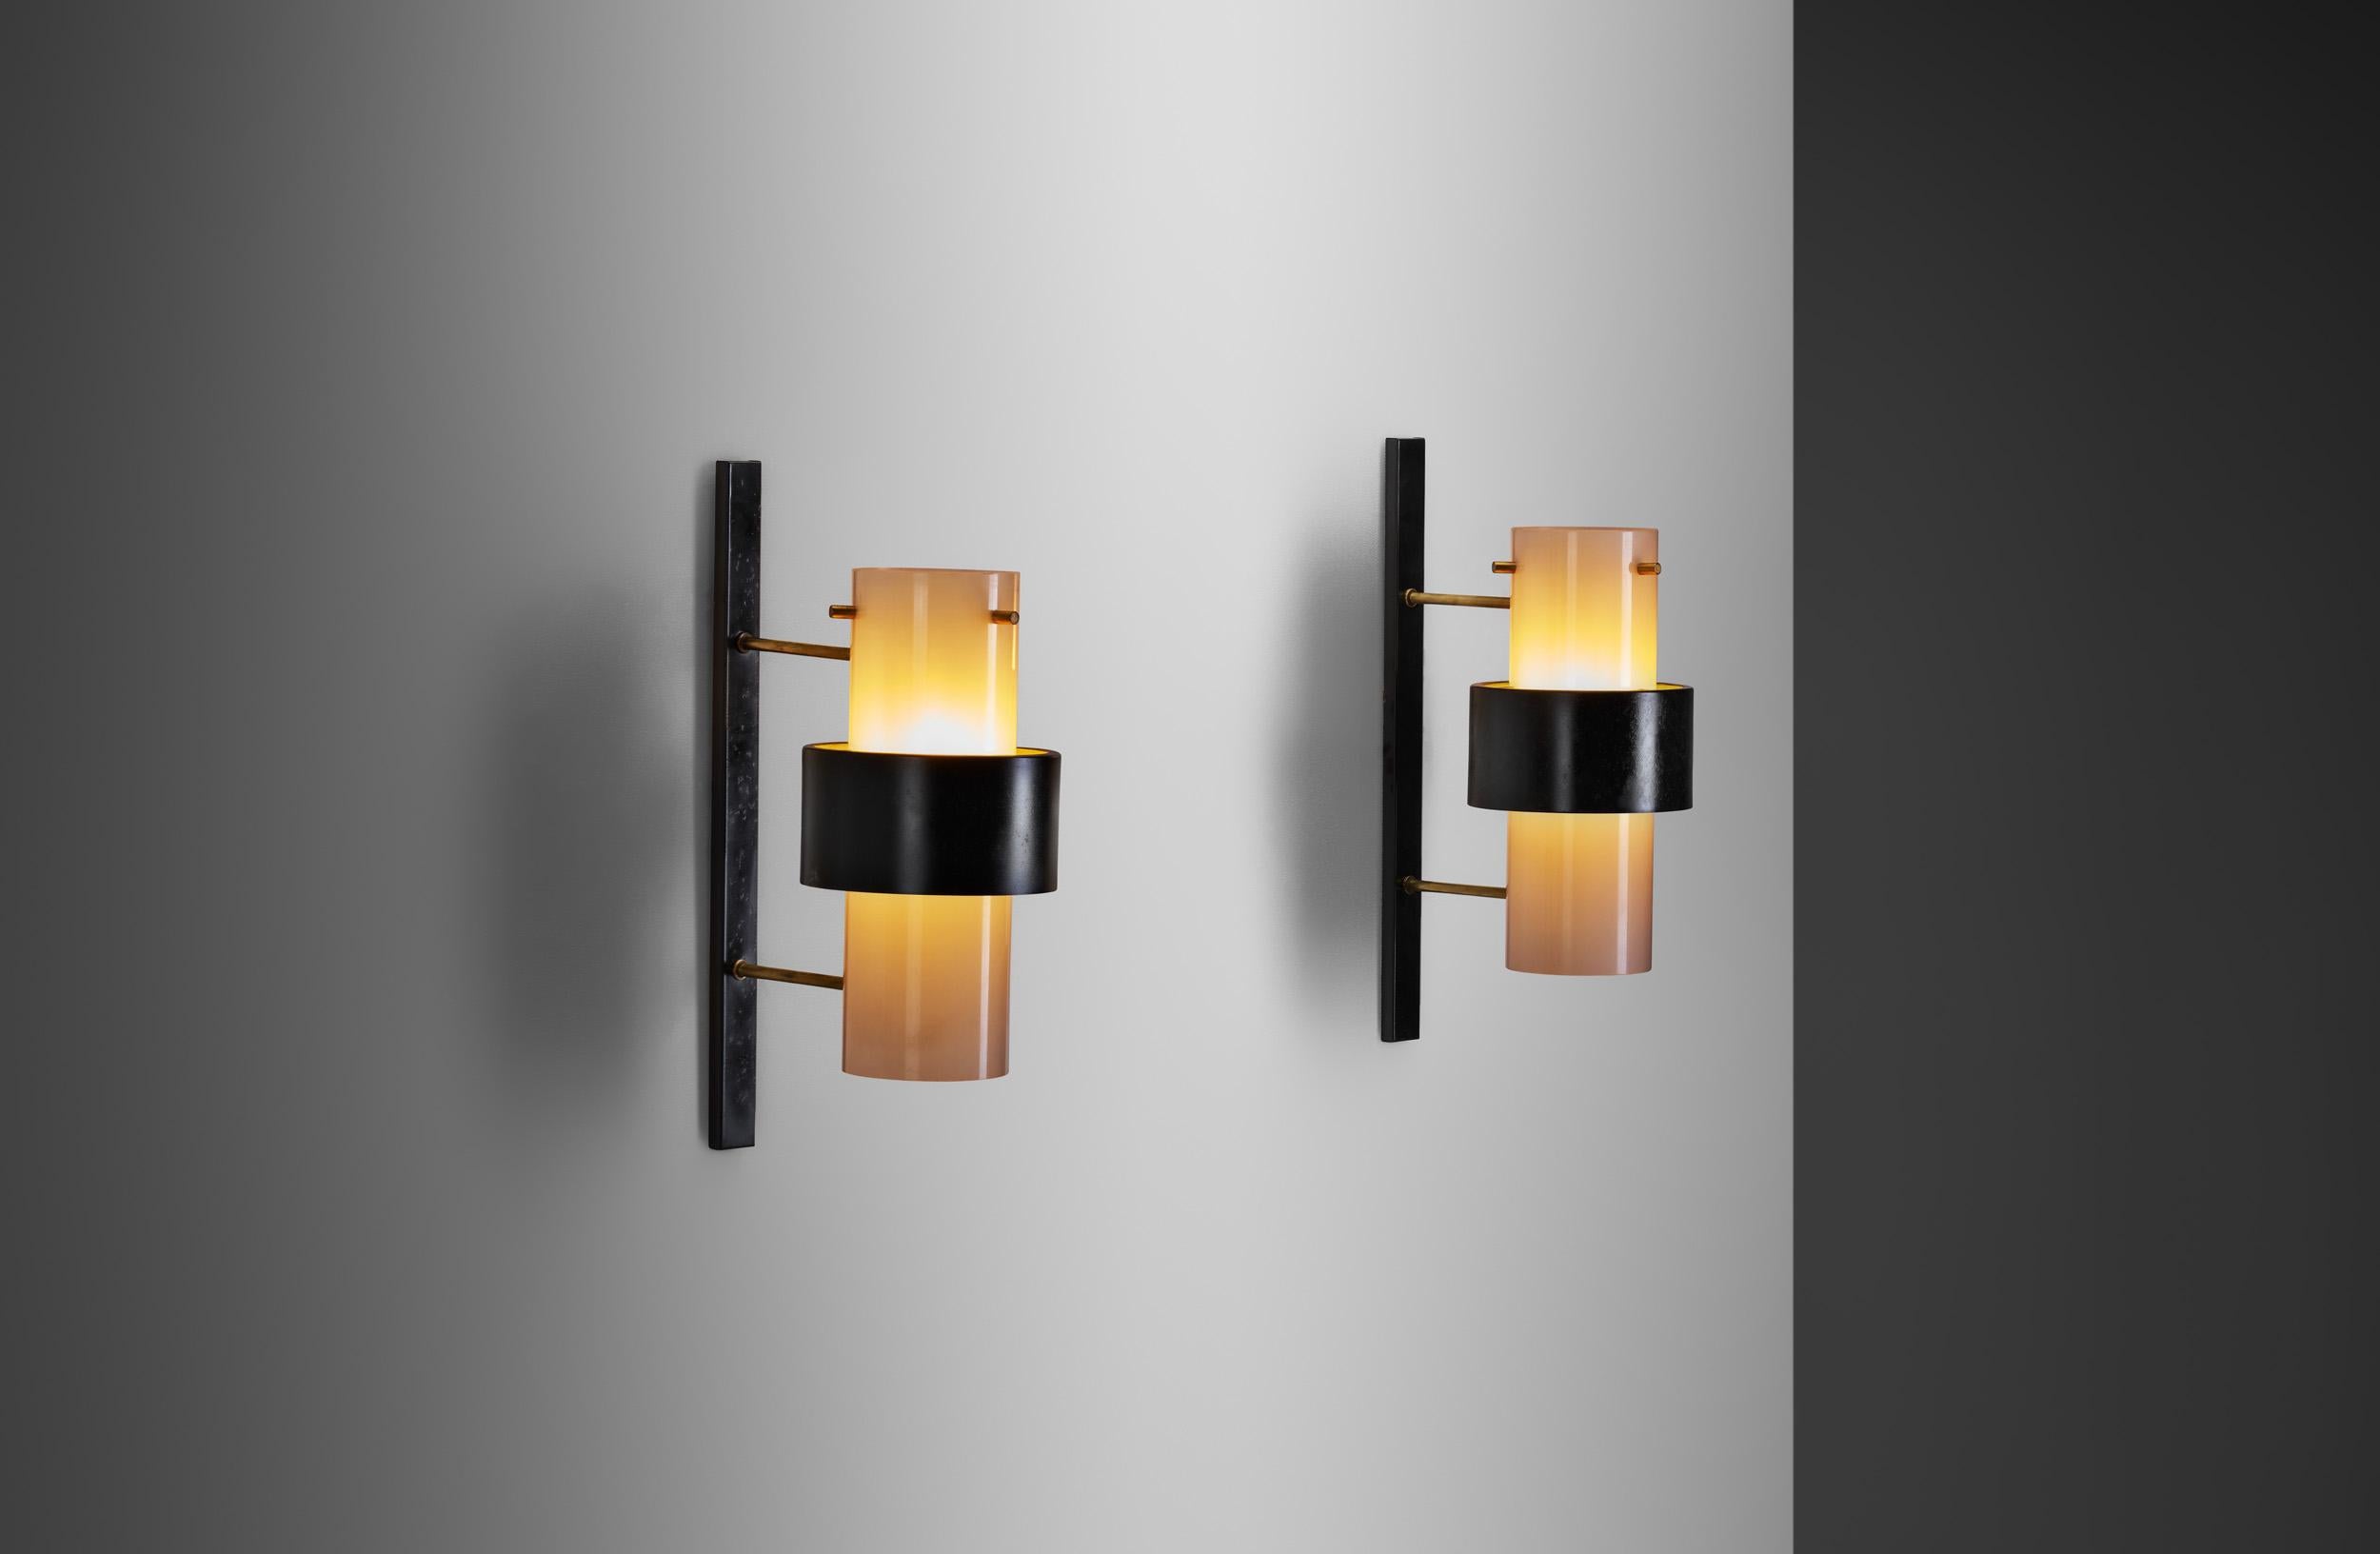 This pair of double sconce wall lights from Maison Lunel are imposing models of an era that saw the creation of some of the most famous lighting designs ever created. From the unique design and materials to the innovative techniques, these sconces